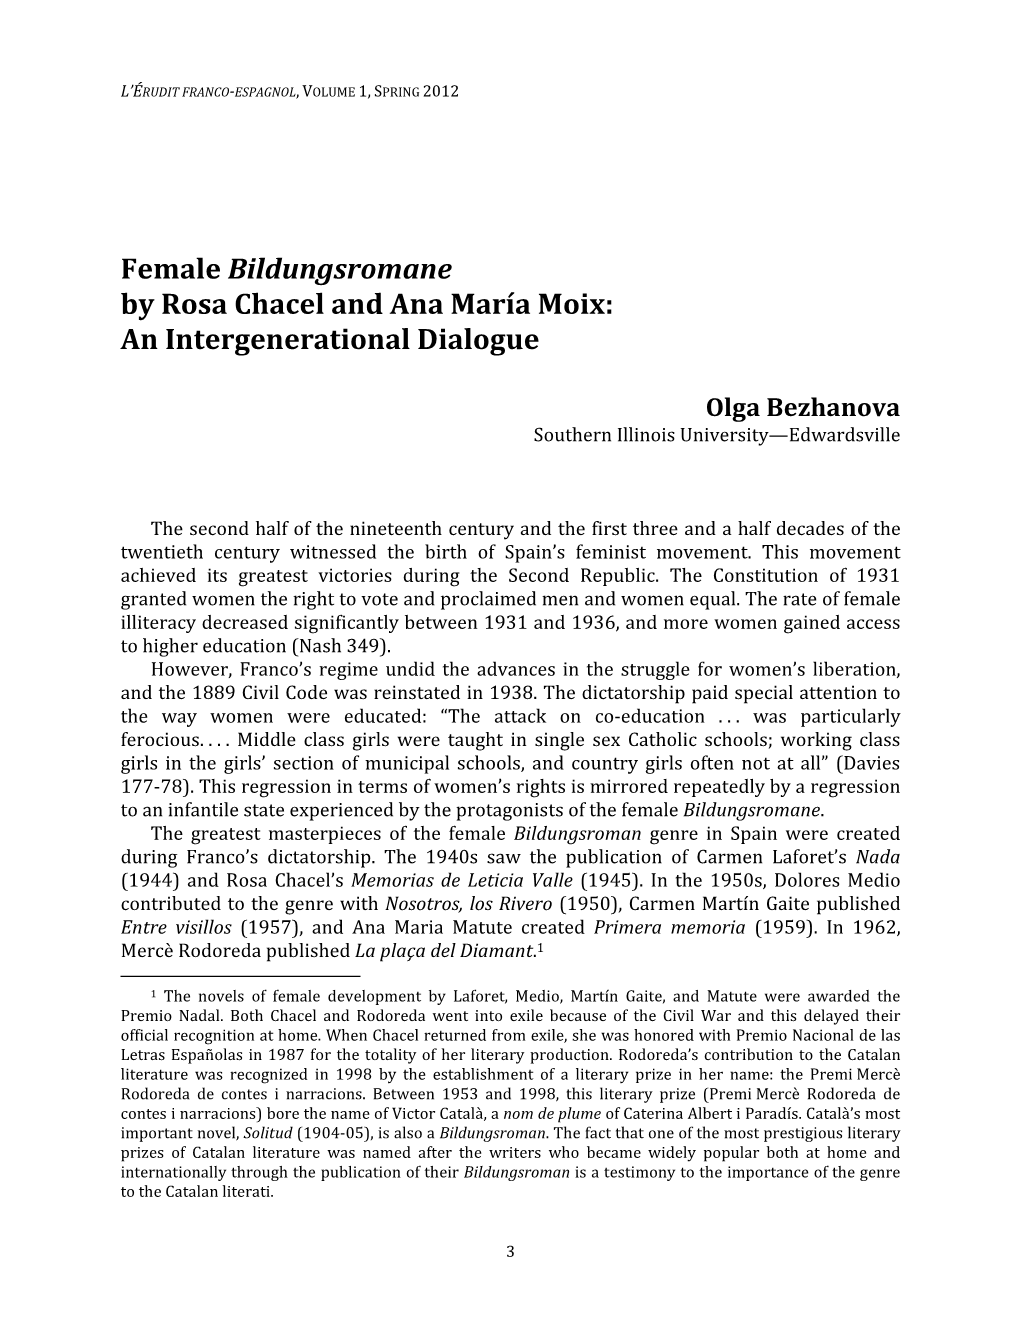 Female Bildungsromane by Rosa Chacel and Ana María Moix: an Intergenerational Dialogue